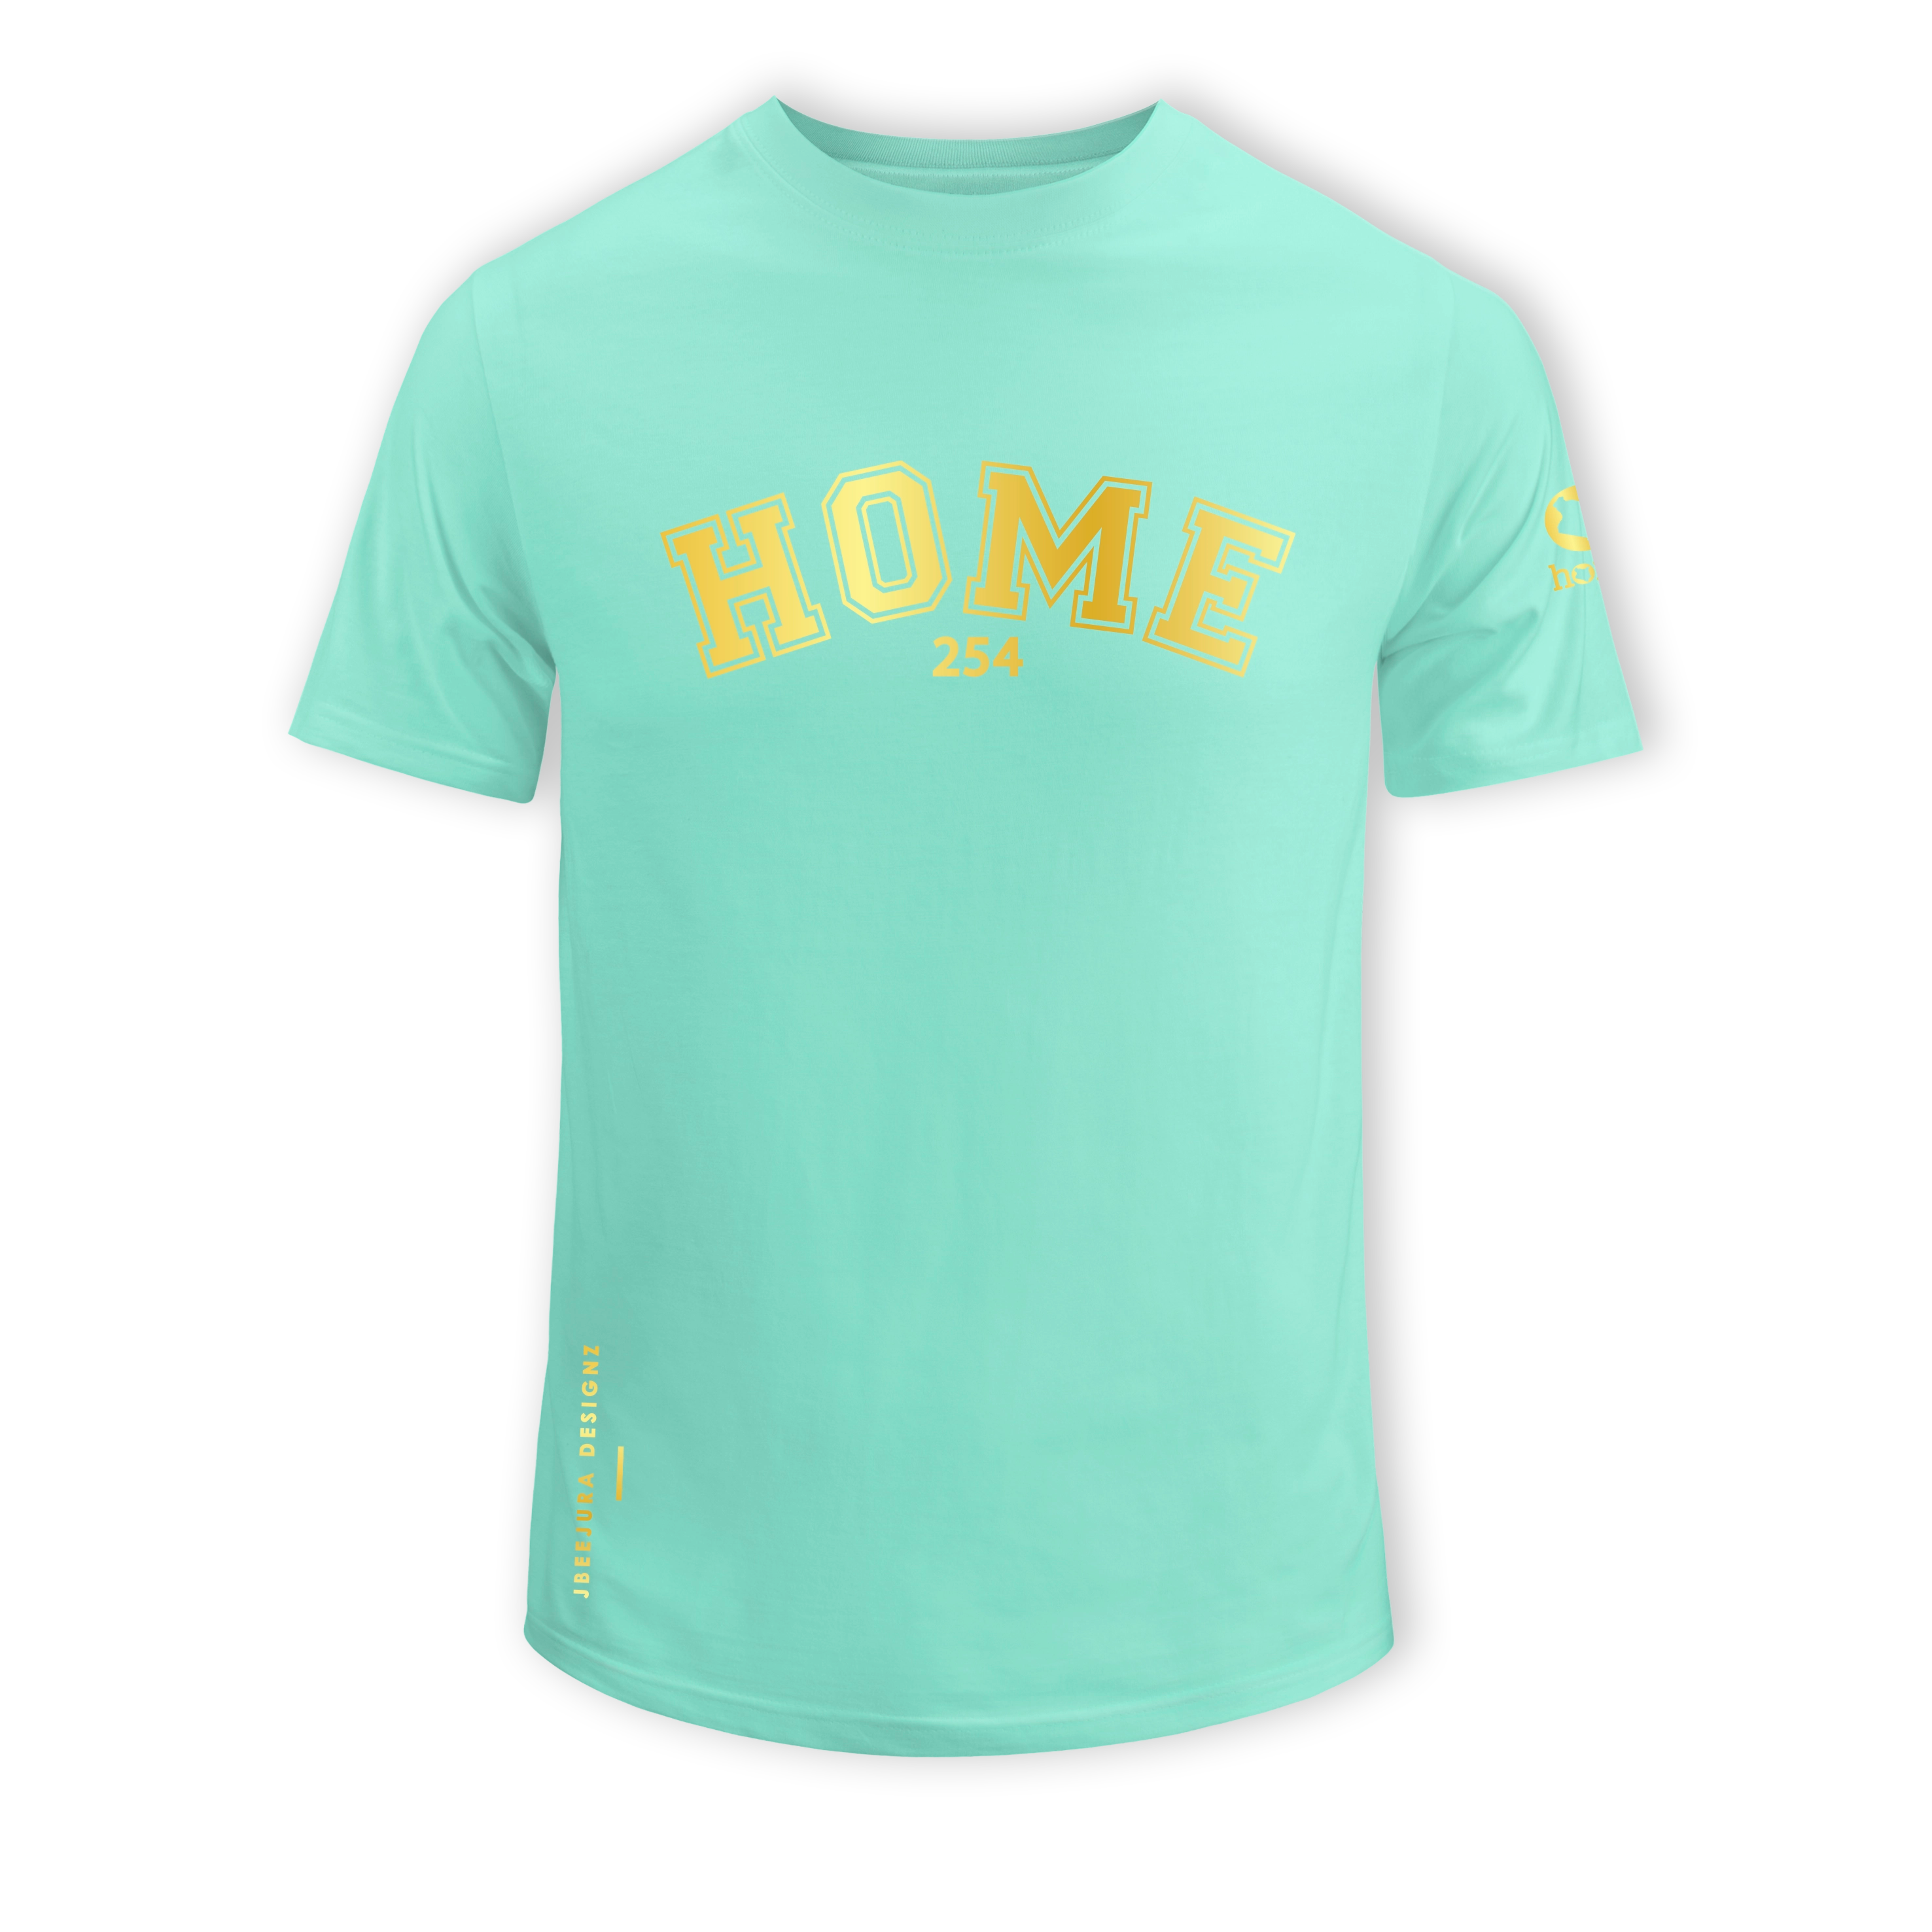 home_254 SHORT-SLEEVED TURQUOISE GREEN T-SHIRT WITH A GOLD COLLEGE PRINT – COTTON PLUS FABRIC